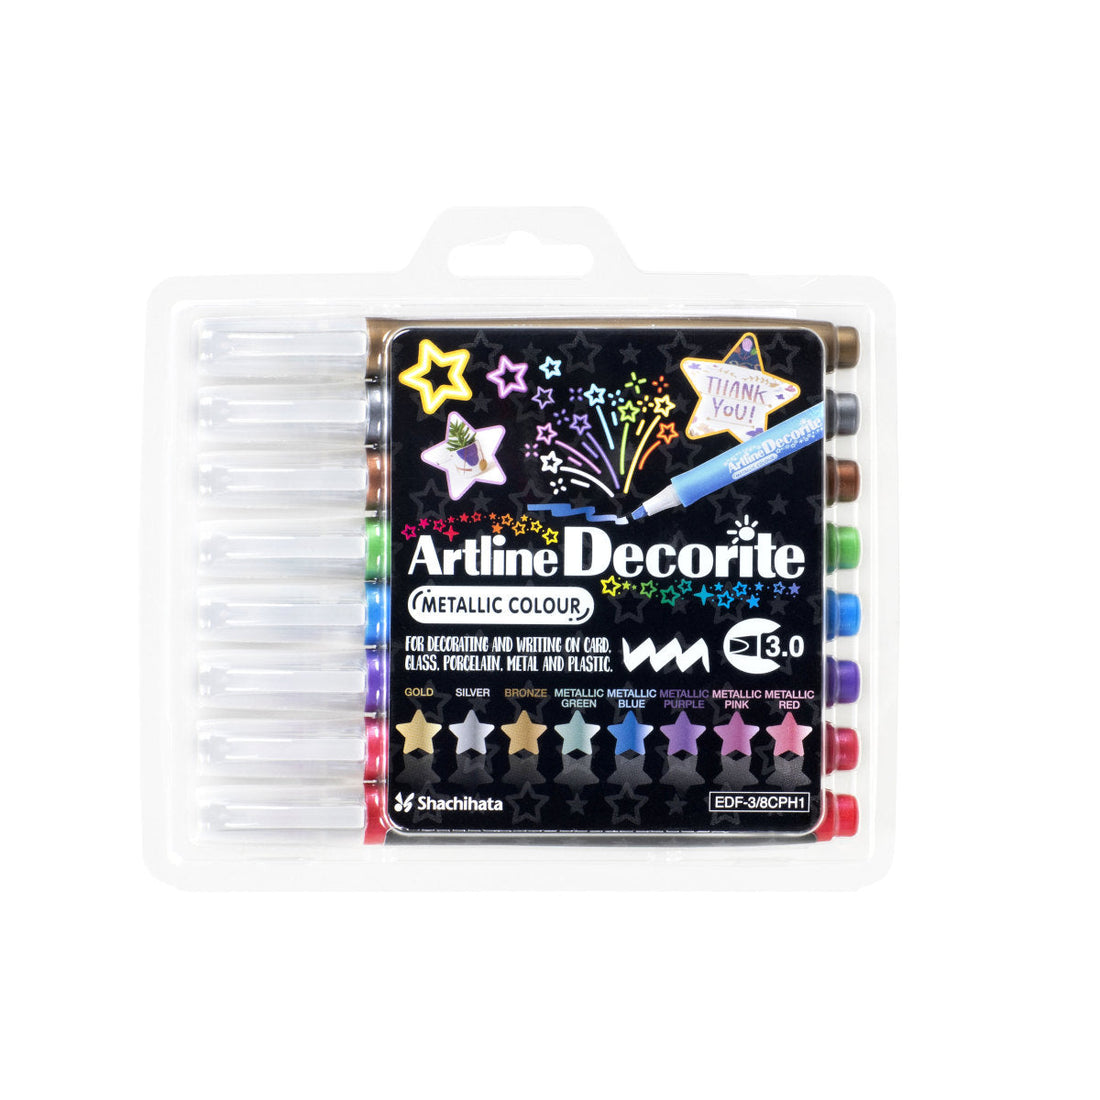 ALI'S ART MARKERS, Alcohol Markers, Dual Tip Double Ended Marker, 60  Colours, Clear Plastic Storage Case, Drawing, Sketching: Markers